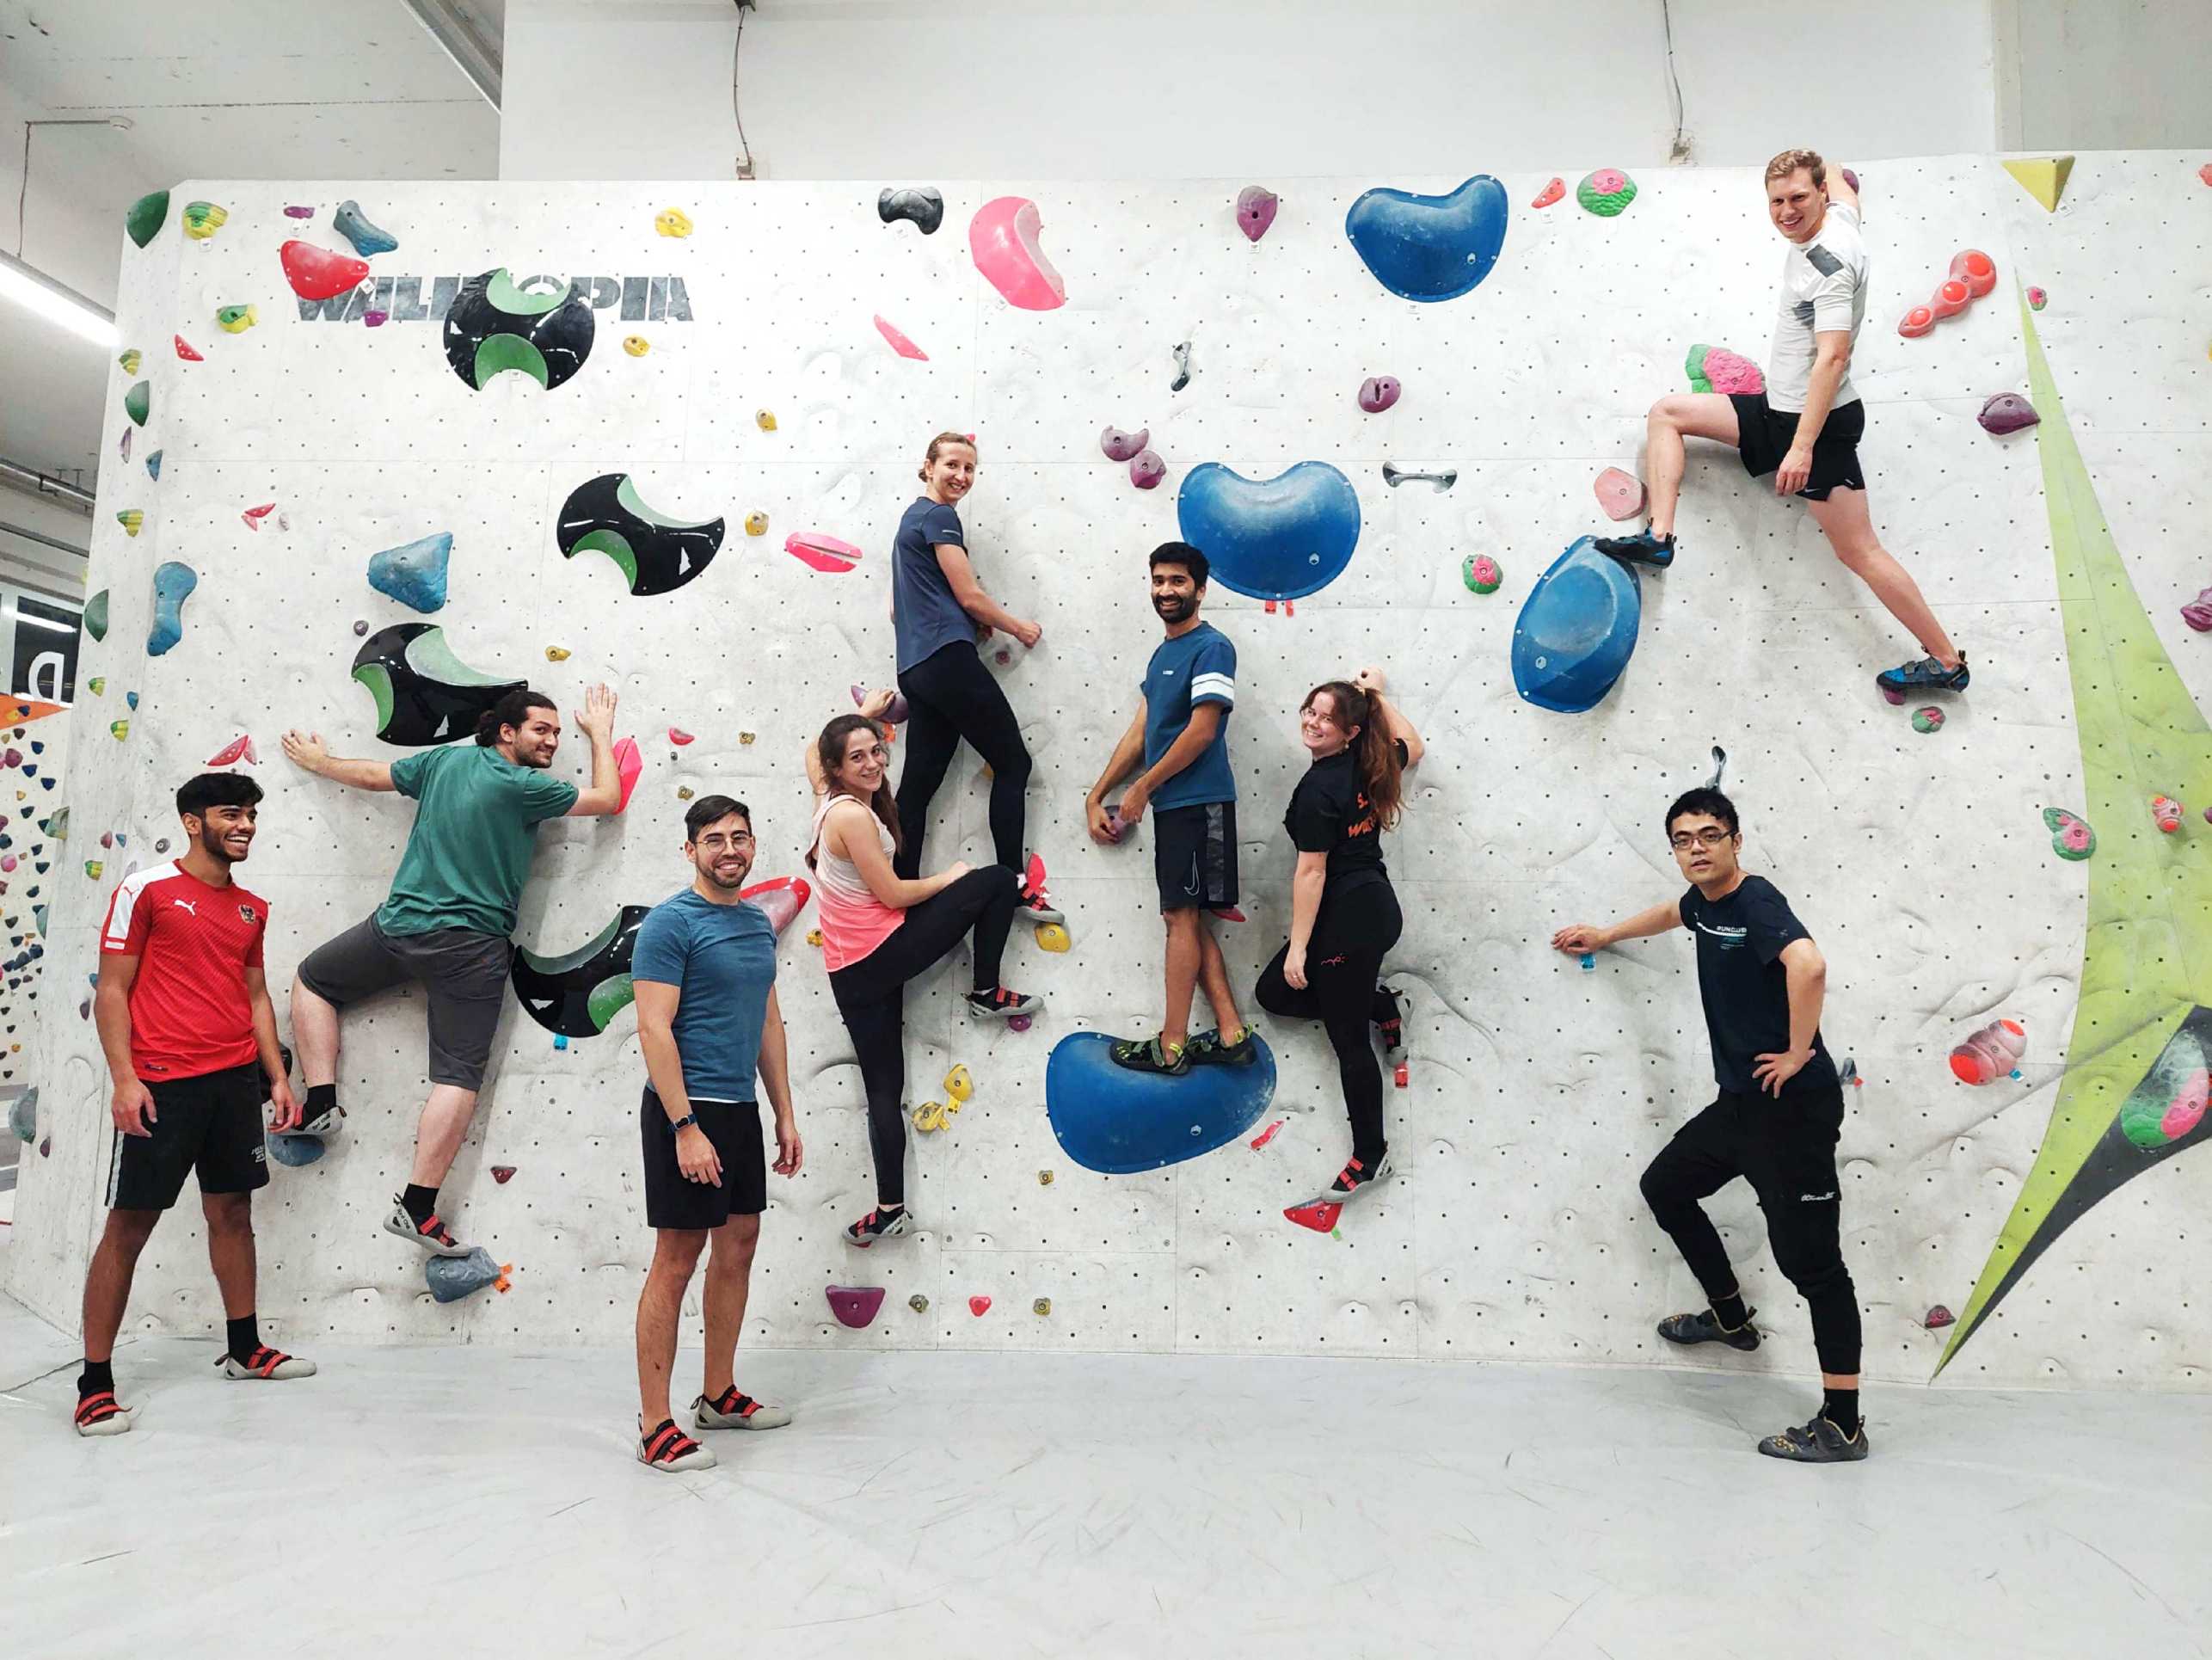 Enlarged view: Group picture of the SCAI group during the excursion to climbing hall. Several people are hanging on the climbing wall